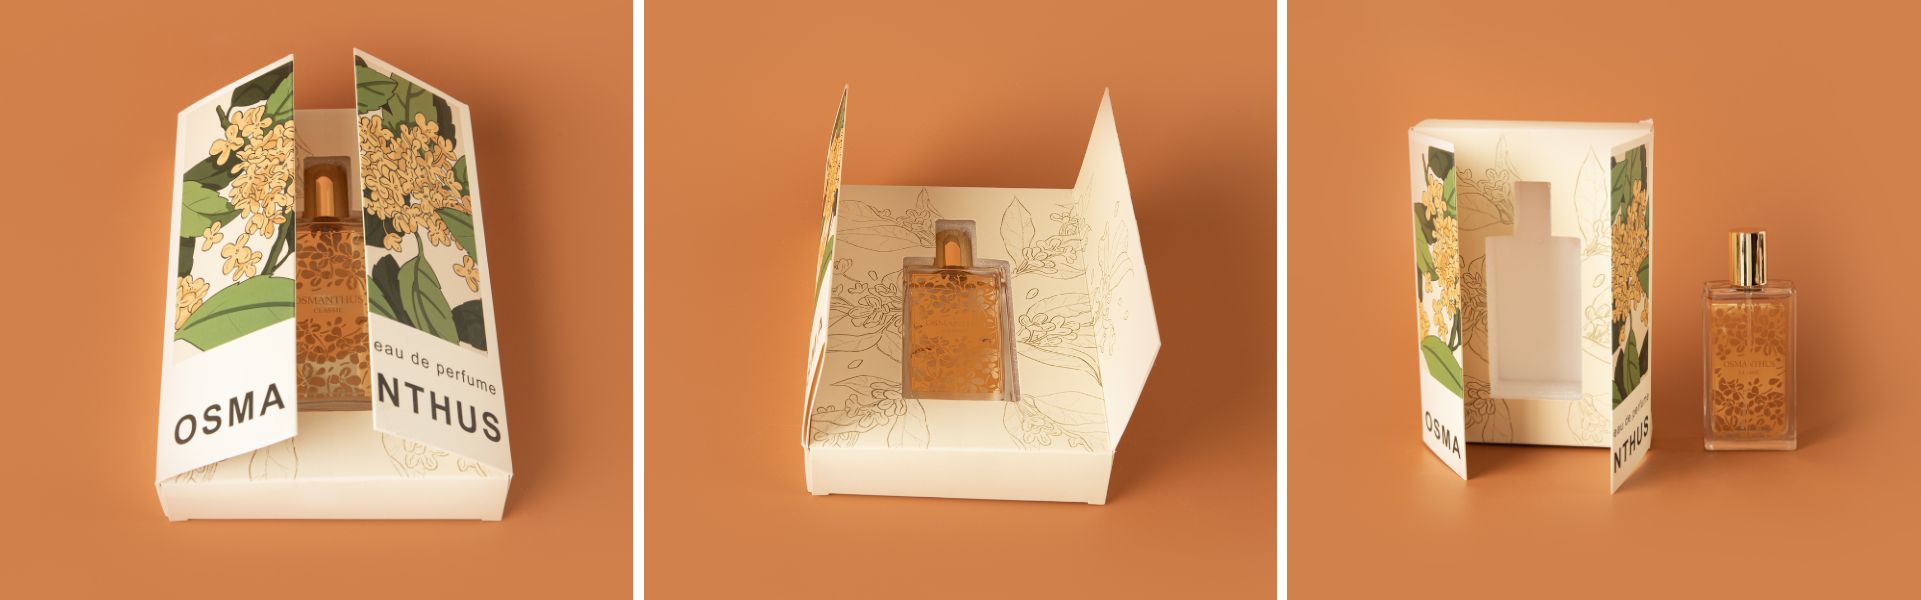 perfume bottle with packaging box